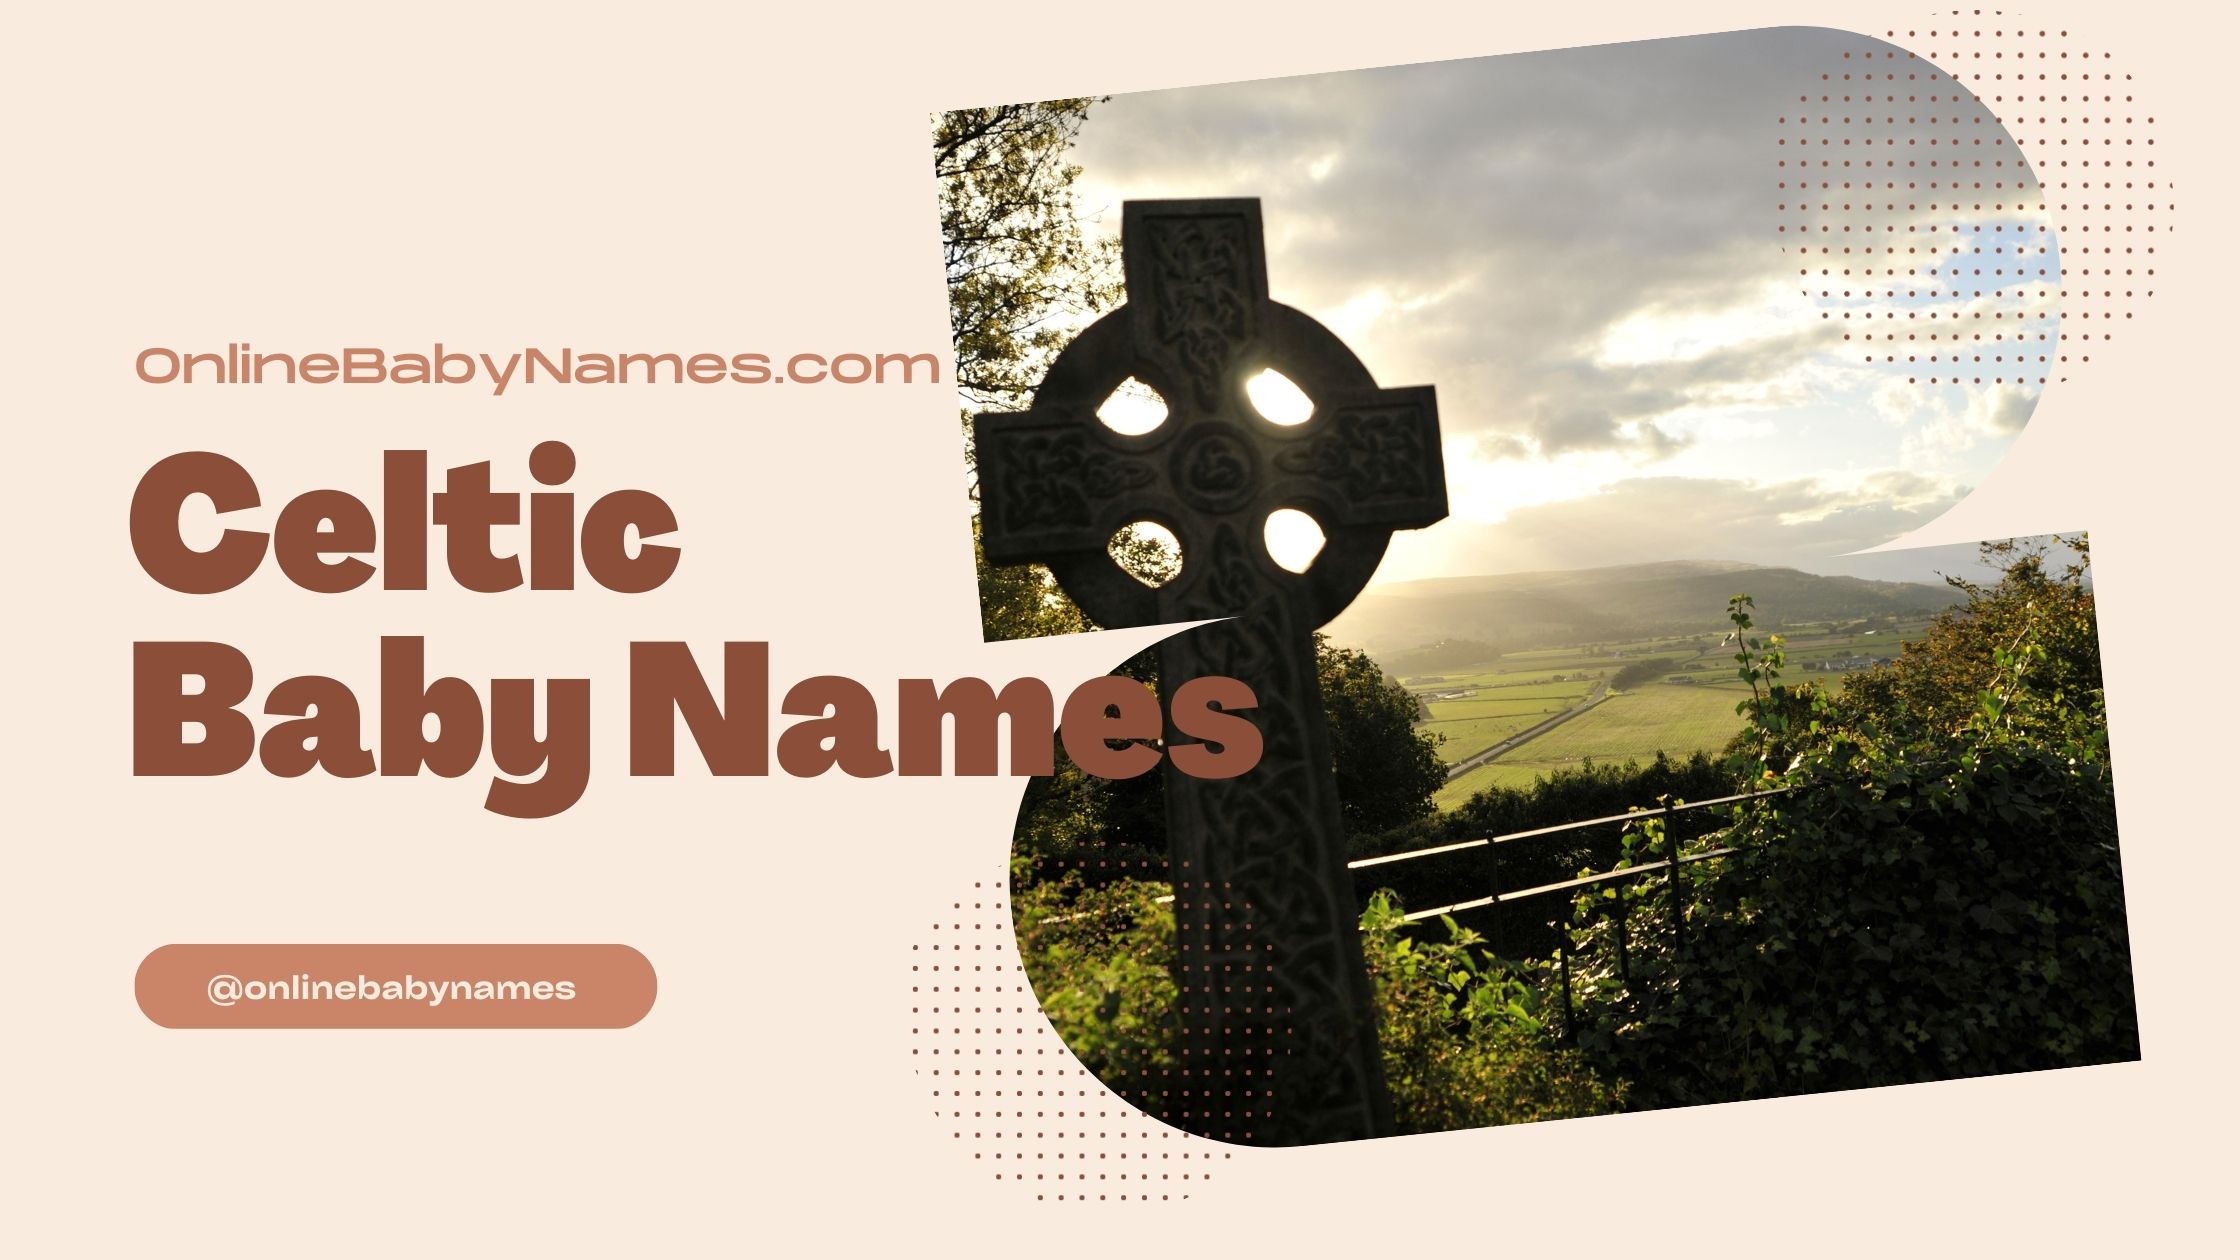 Celtic Baby Names